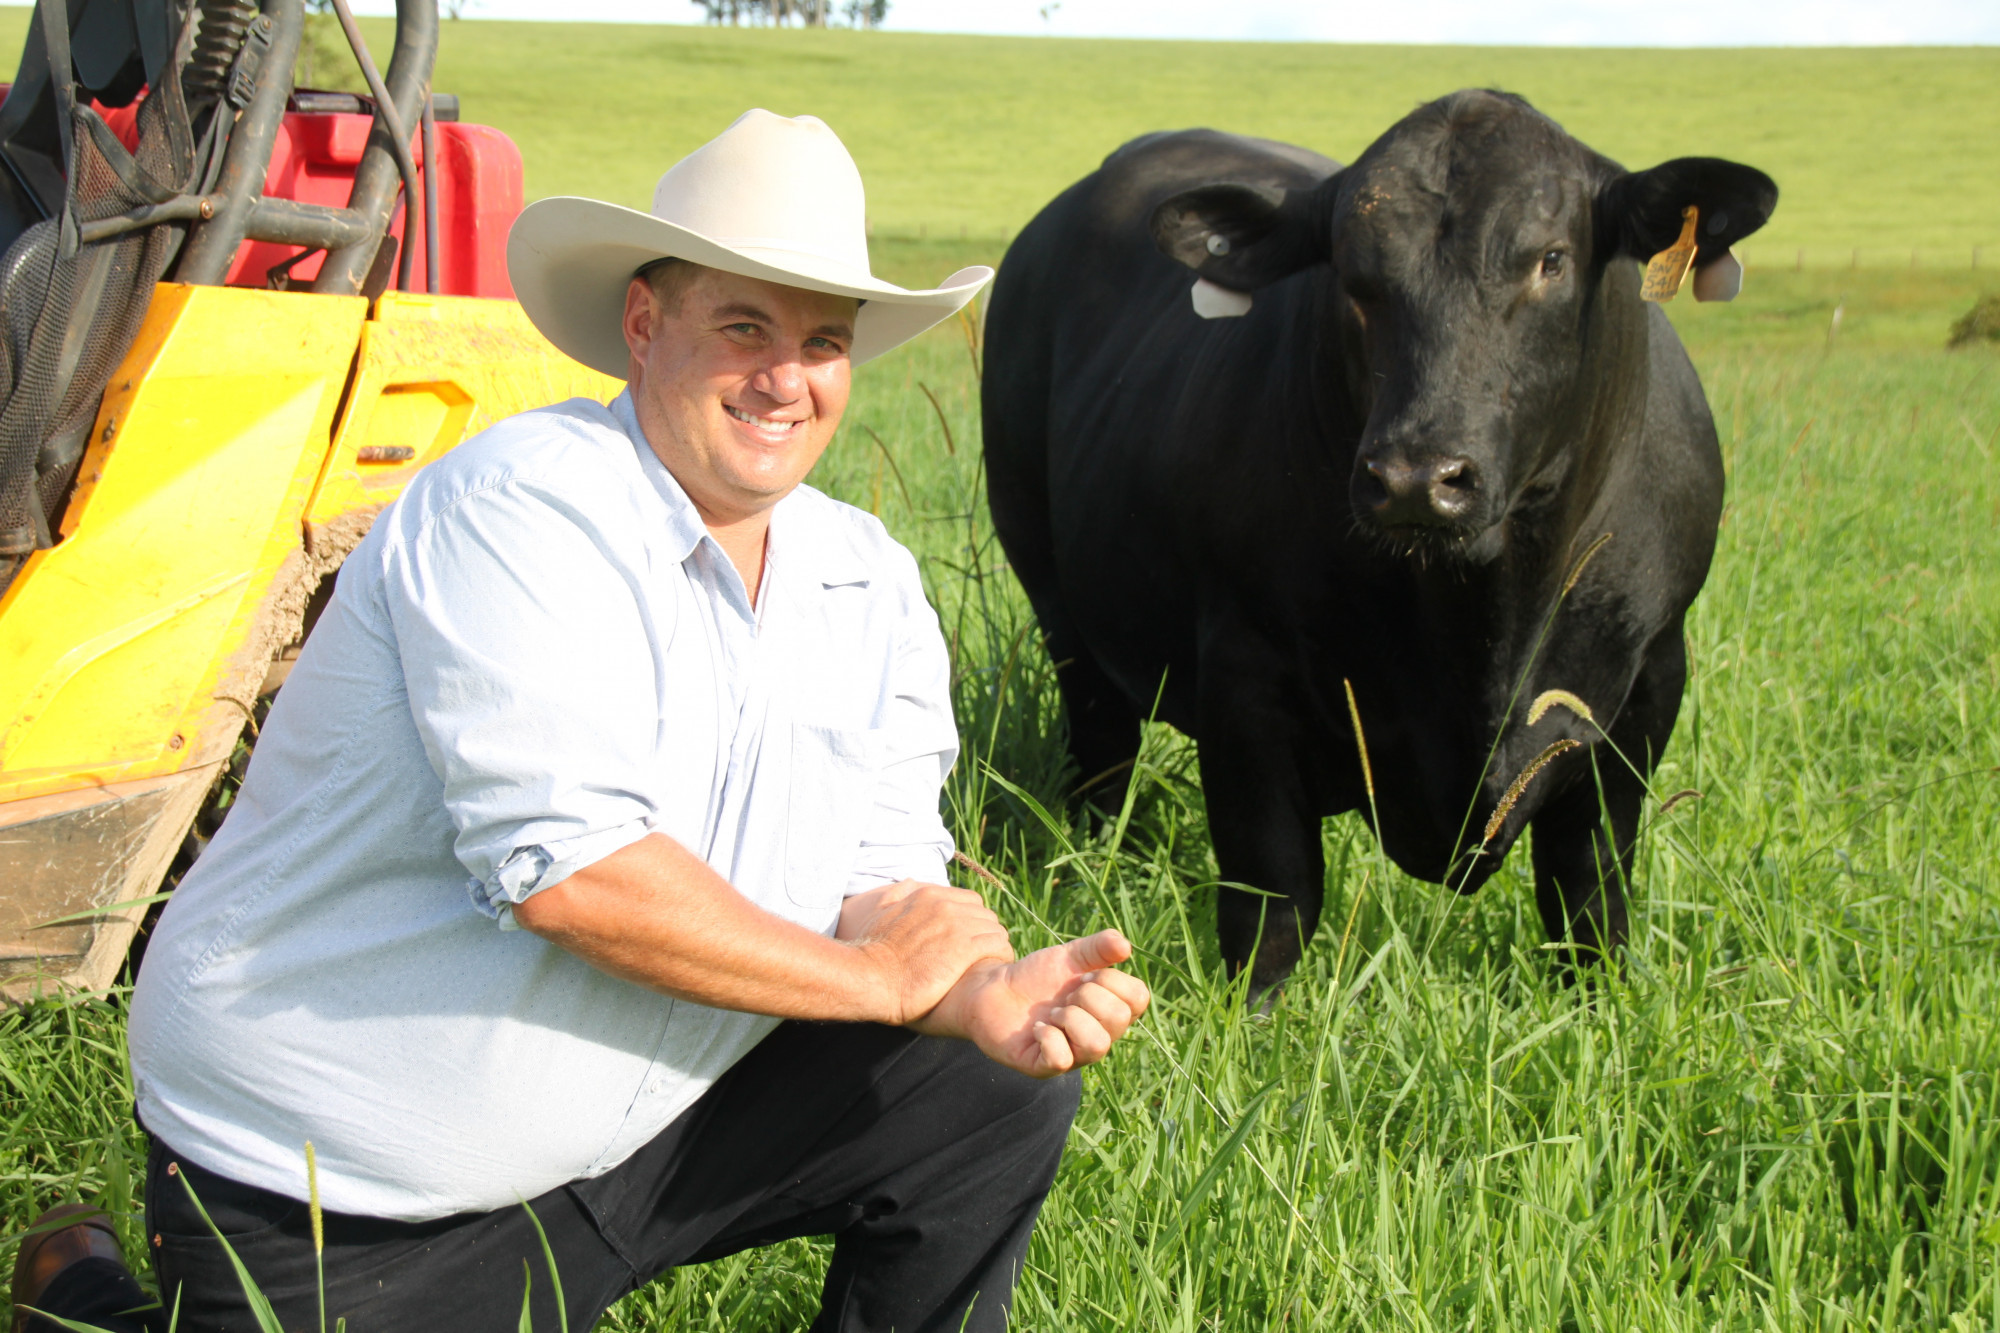 Shane Strazerri is looking forward to this year's Rockhampton Brangus sale, where Ultra Black sire, Baronessa Mr Holloway will lead their team of 7 bulls on off er. INSET: On the back of their international success, Joe, Sharon and Shane Strazzeri of Baronessa Farm, Atherton, will off er a draft of nine Brangus bulls for sale at the FNQ Field Days in May.